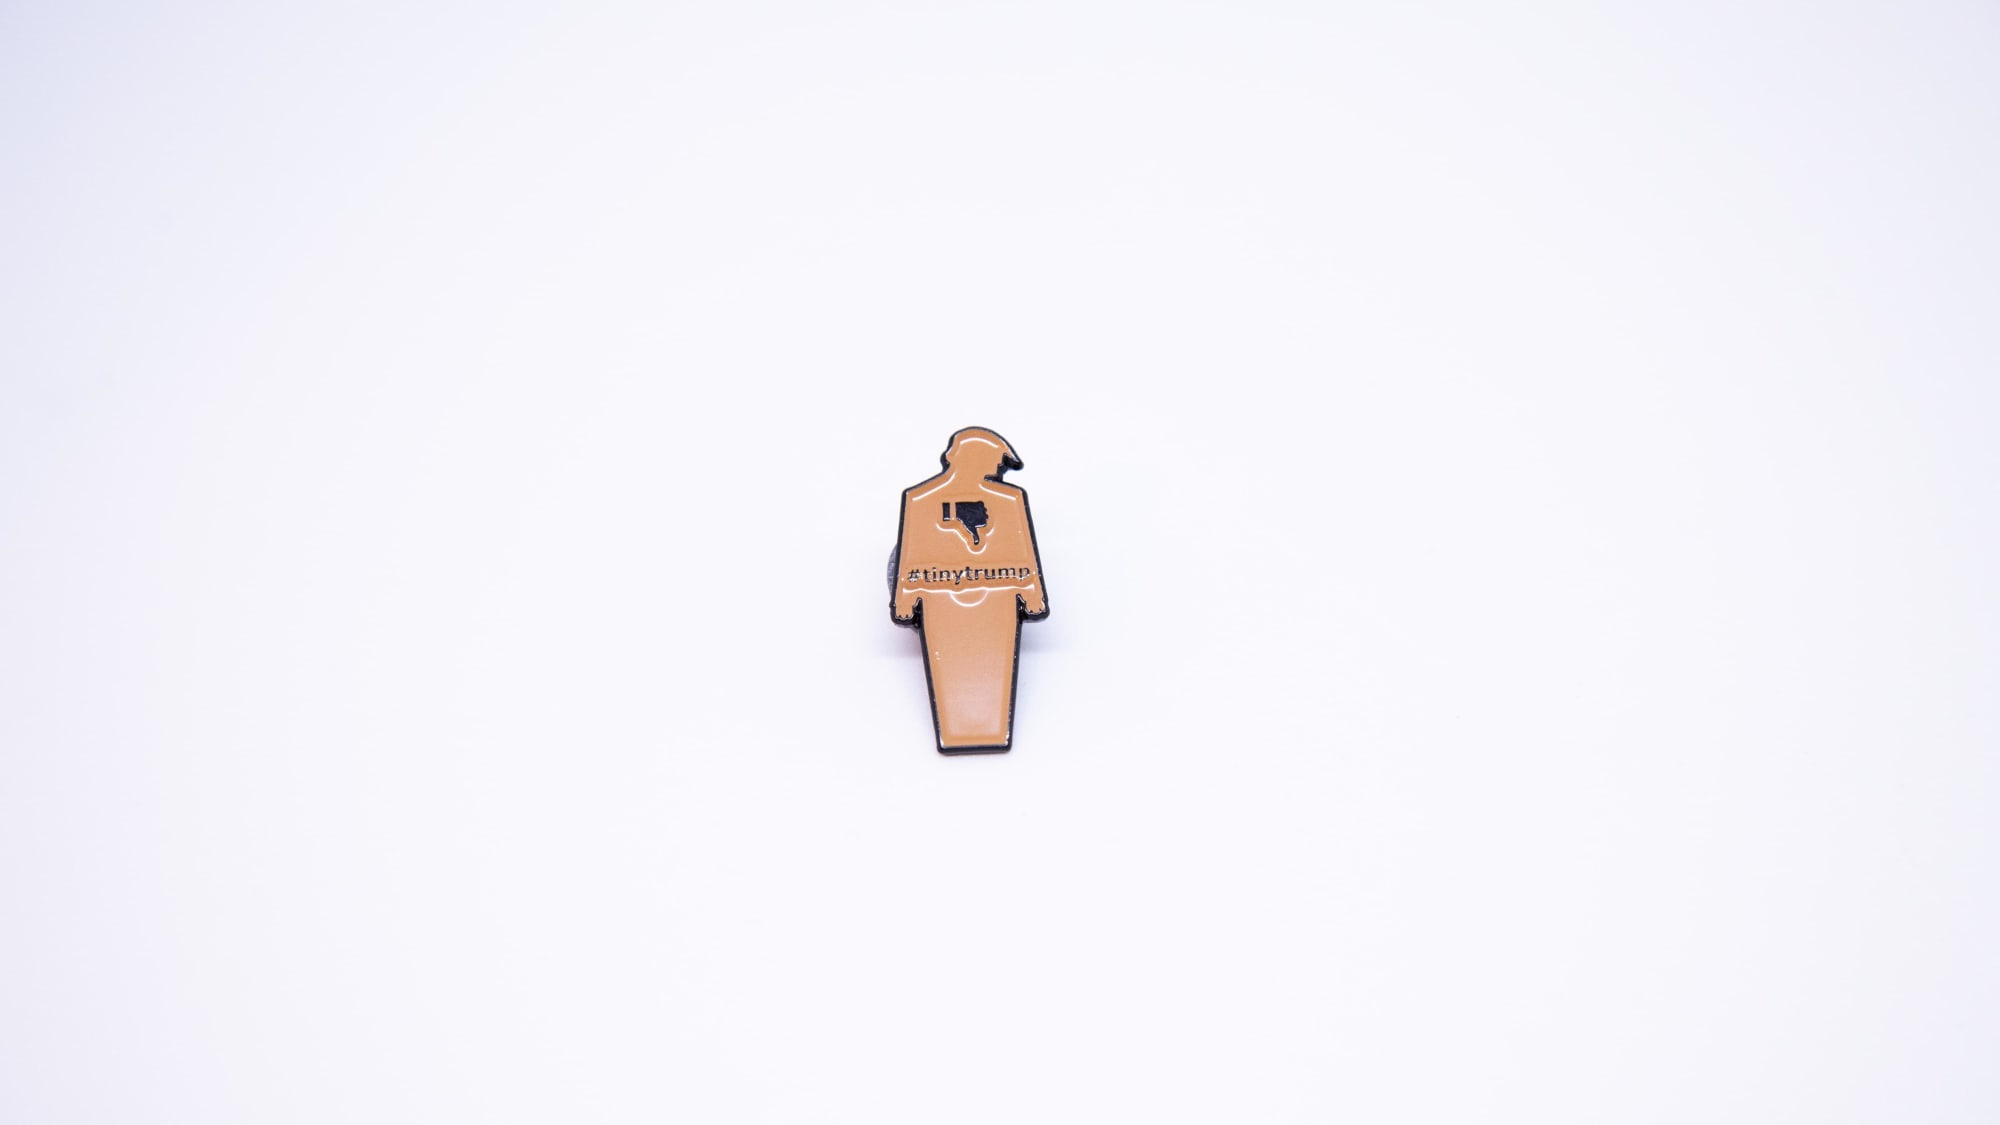 Photograph of a brown tiny trump enamel pin with a thumbs down sign on the left lapel of a man's suit blazer